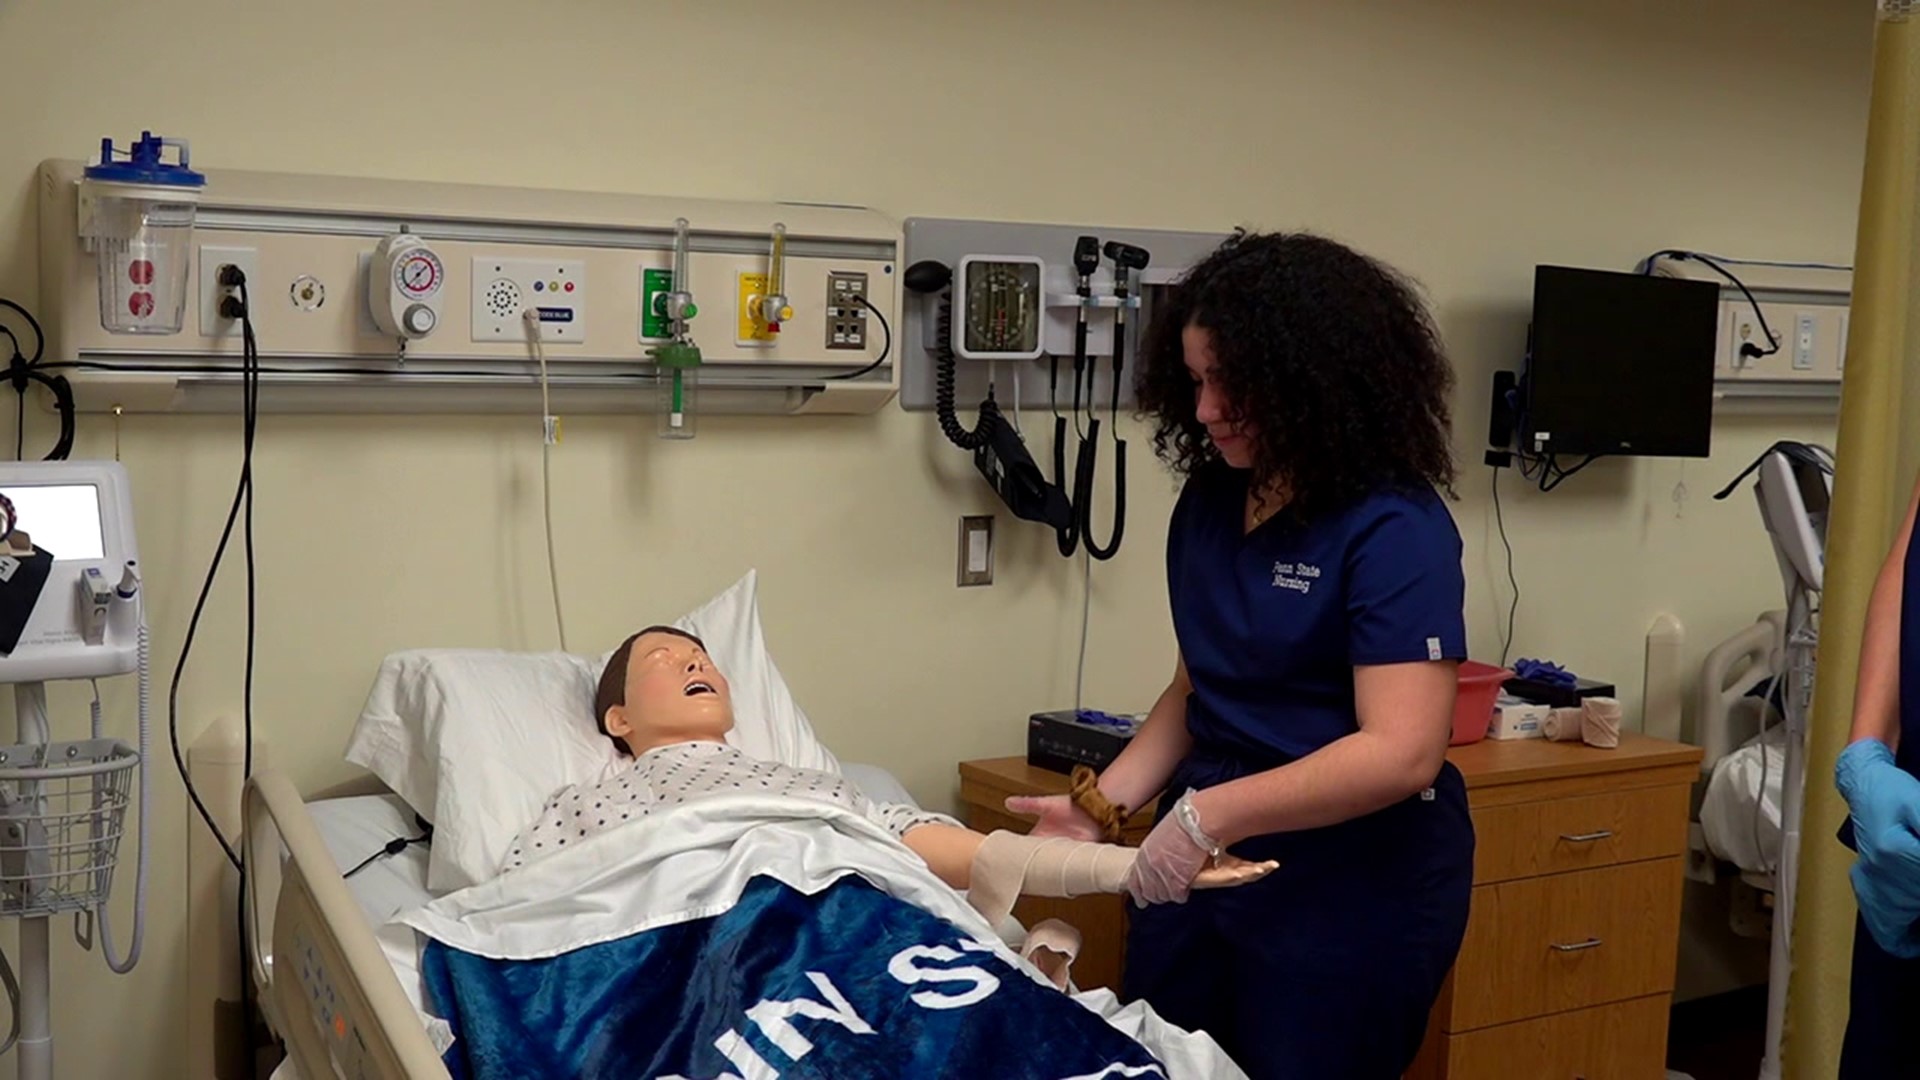 Nursing shortages across Pennsylvania have made it difficult to give patients the care they need. Now, some in Schuylkill County want to change that.